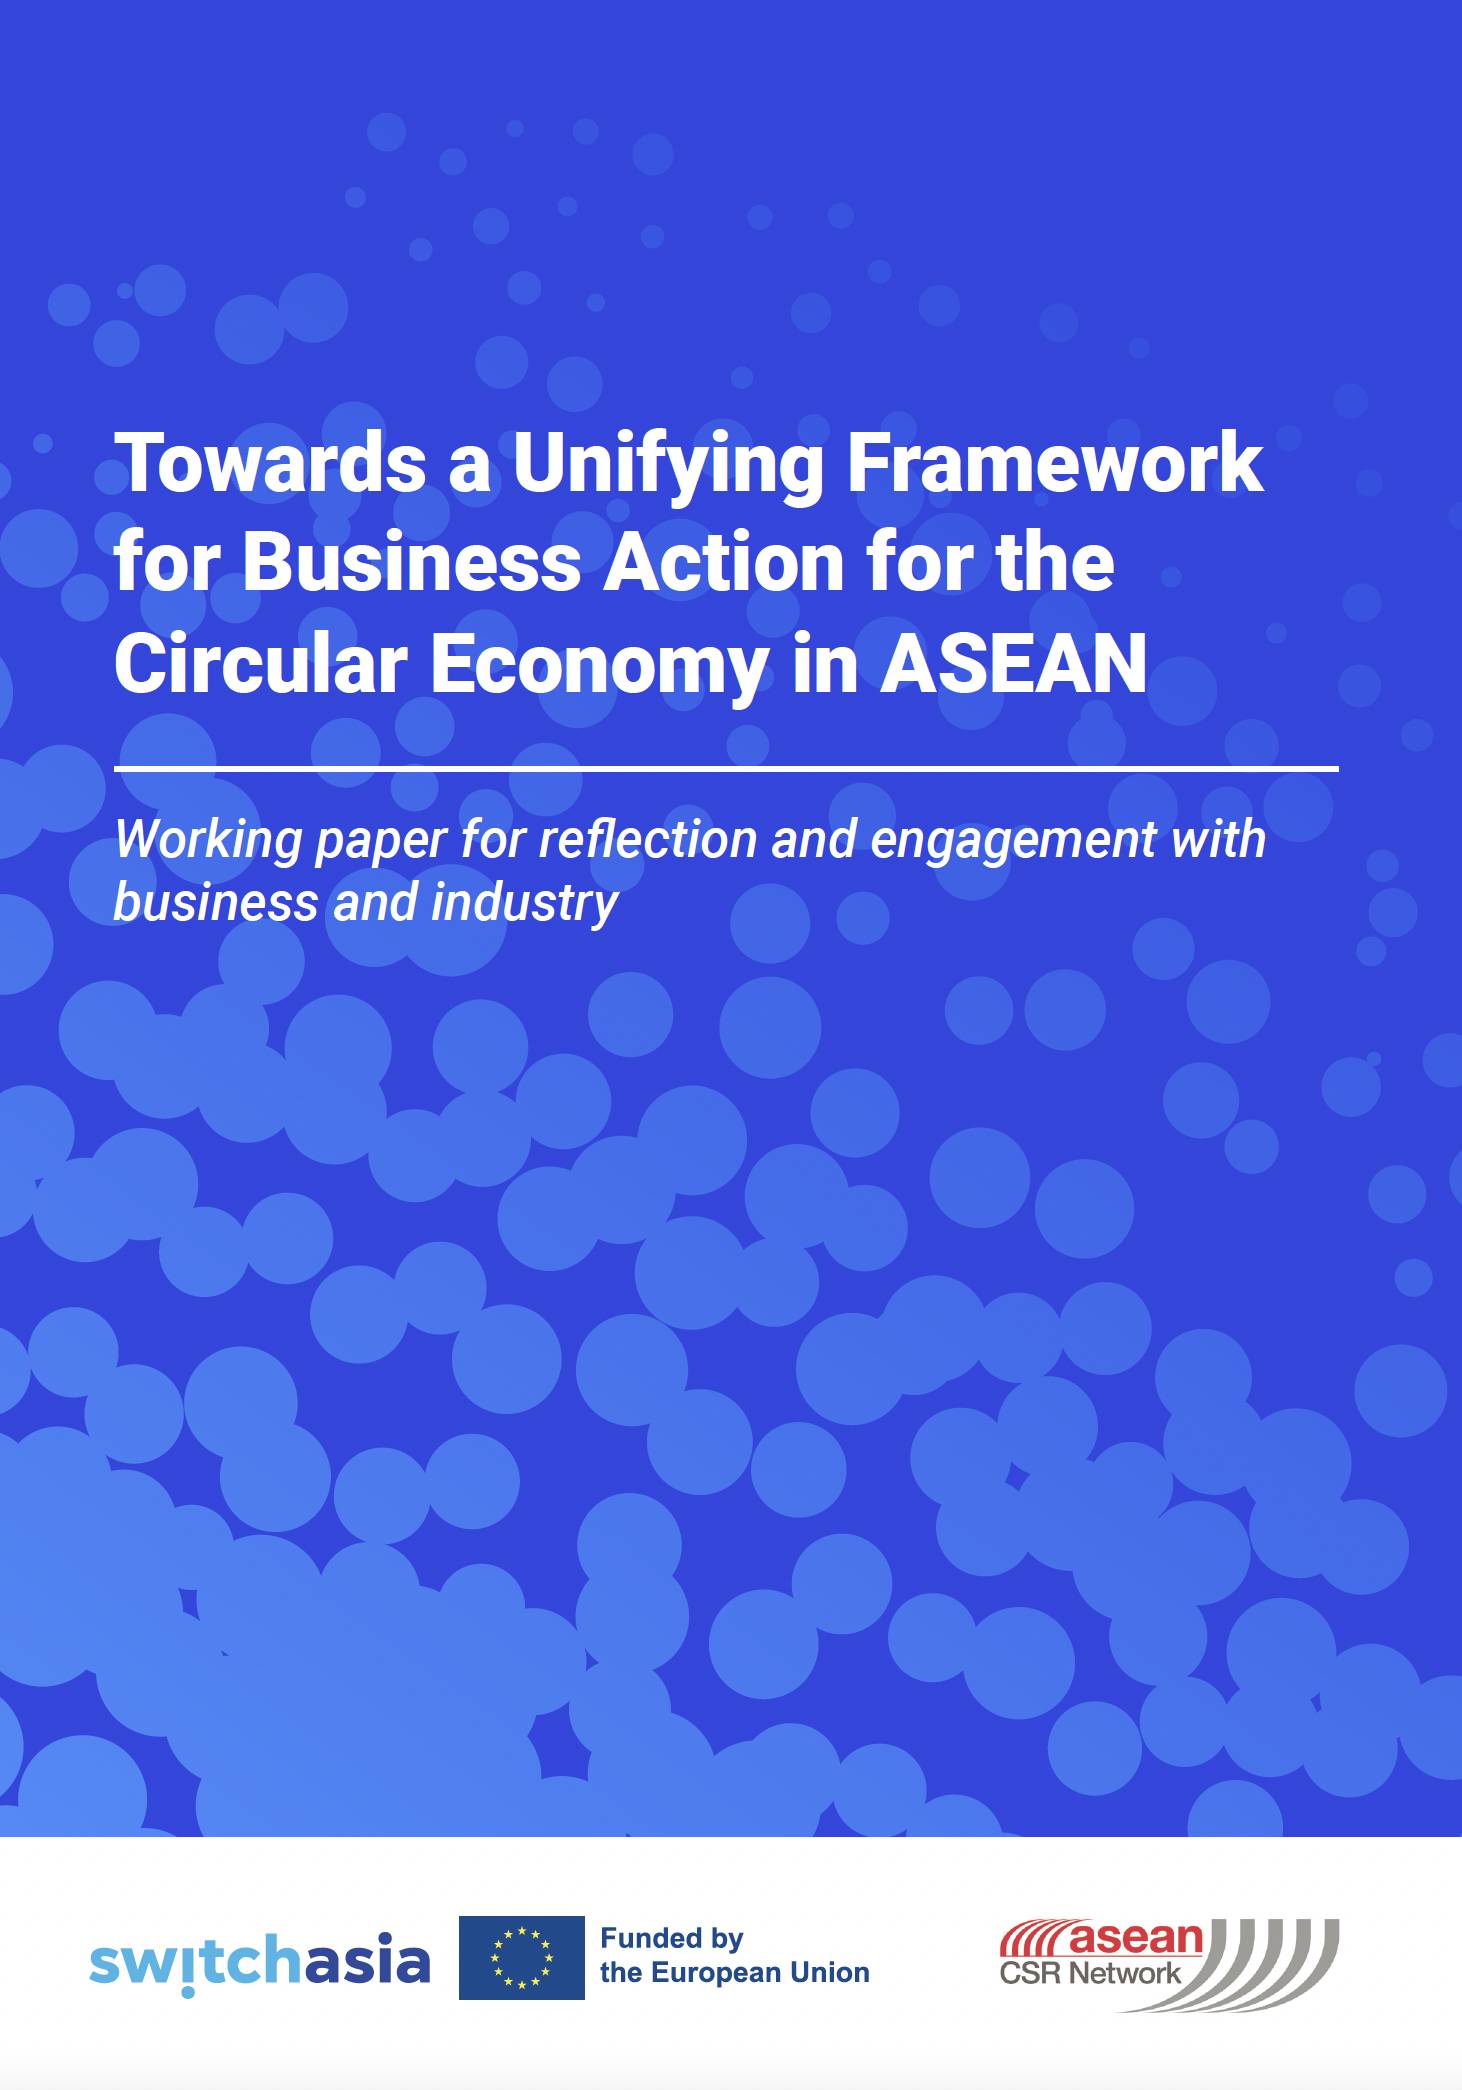 Towards a Unifying Framework for Business Action for the Circular Economy in ASEAN